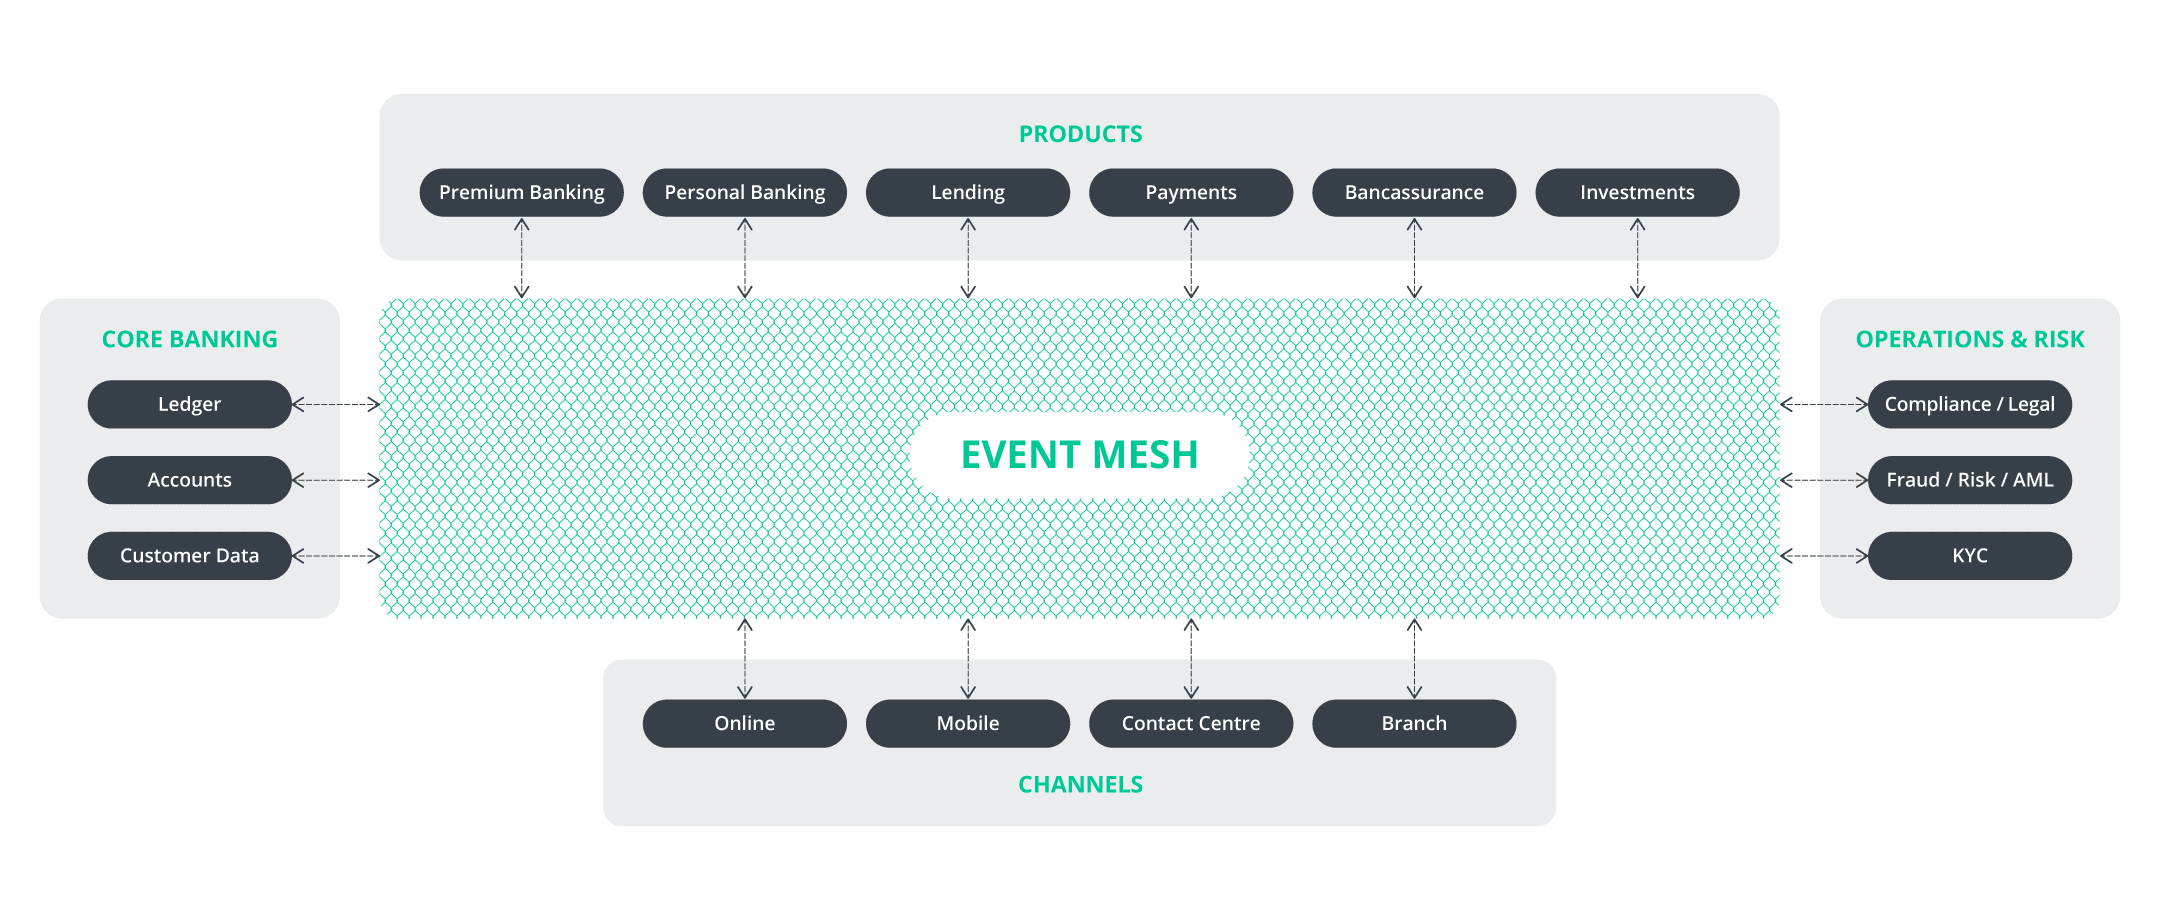 Event mesh : real-time, event-driven communications between systems and services across environments and geographies.